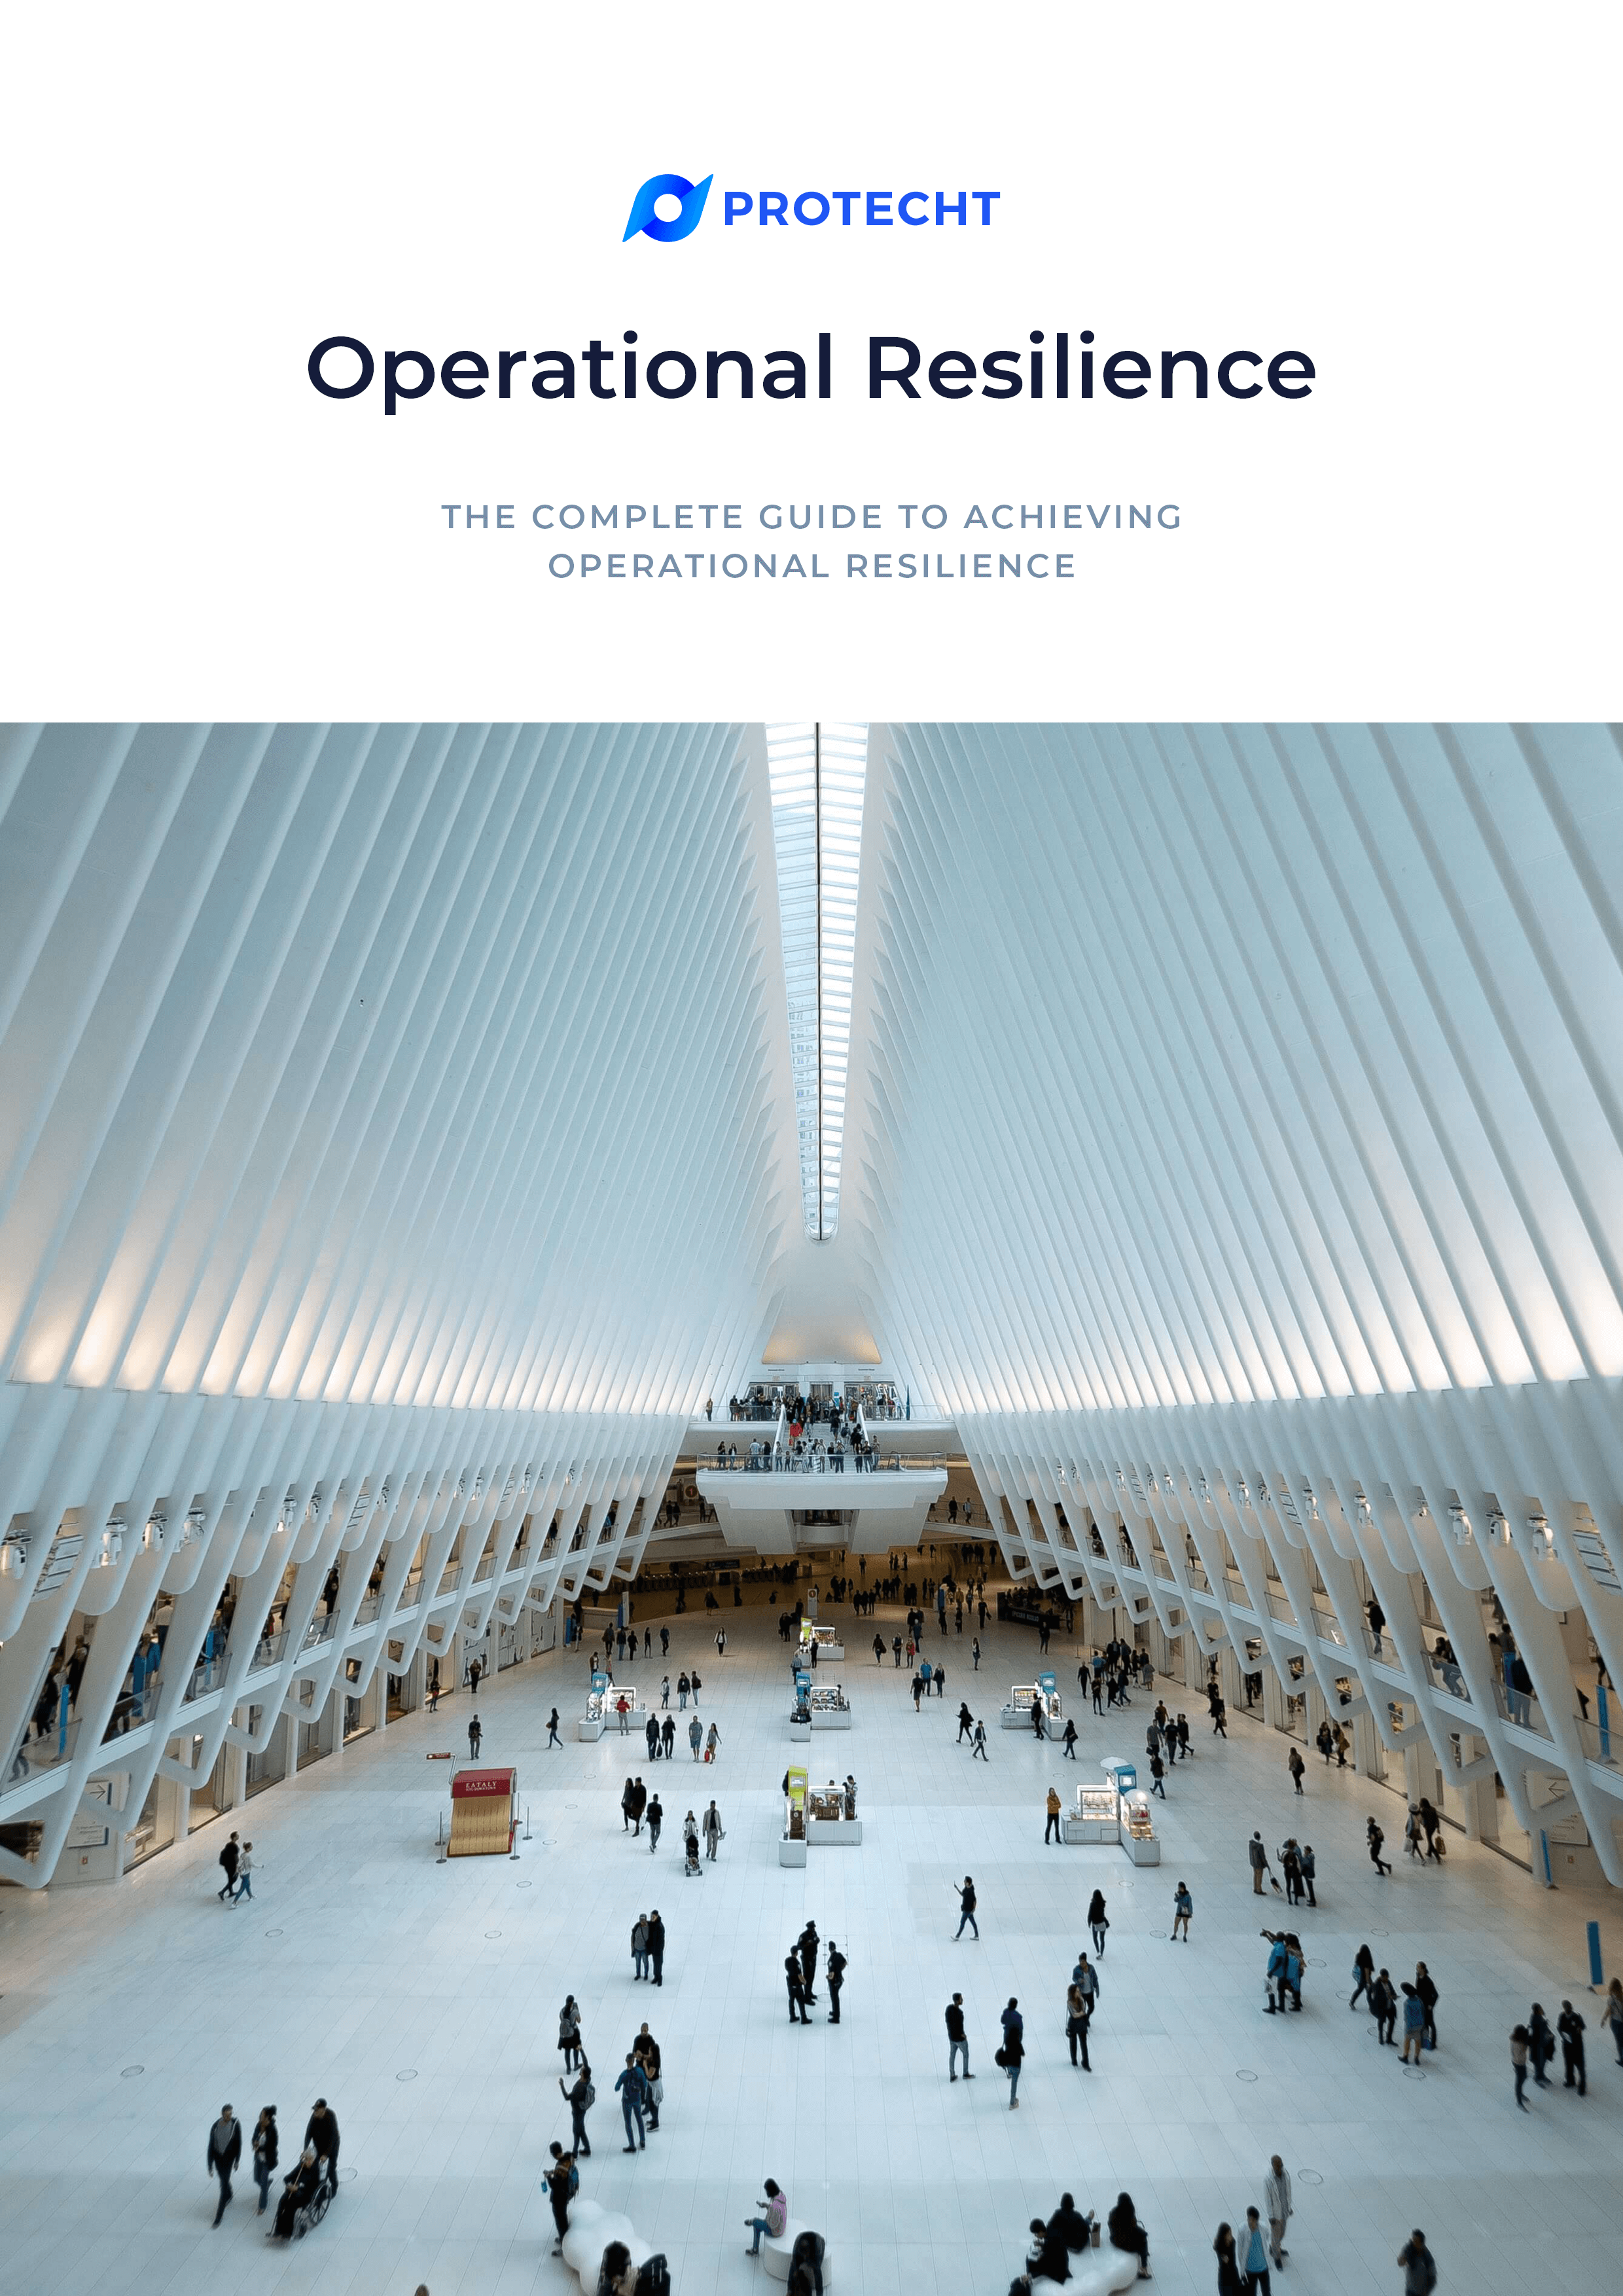 The Complete Guide to Achieving Operational Resilience